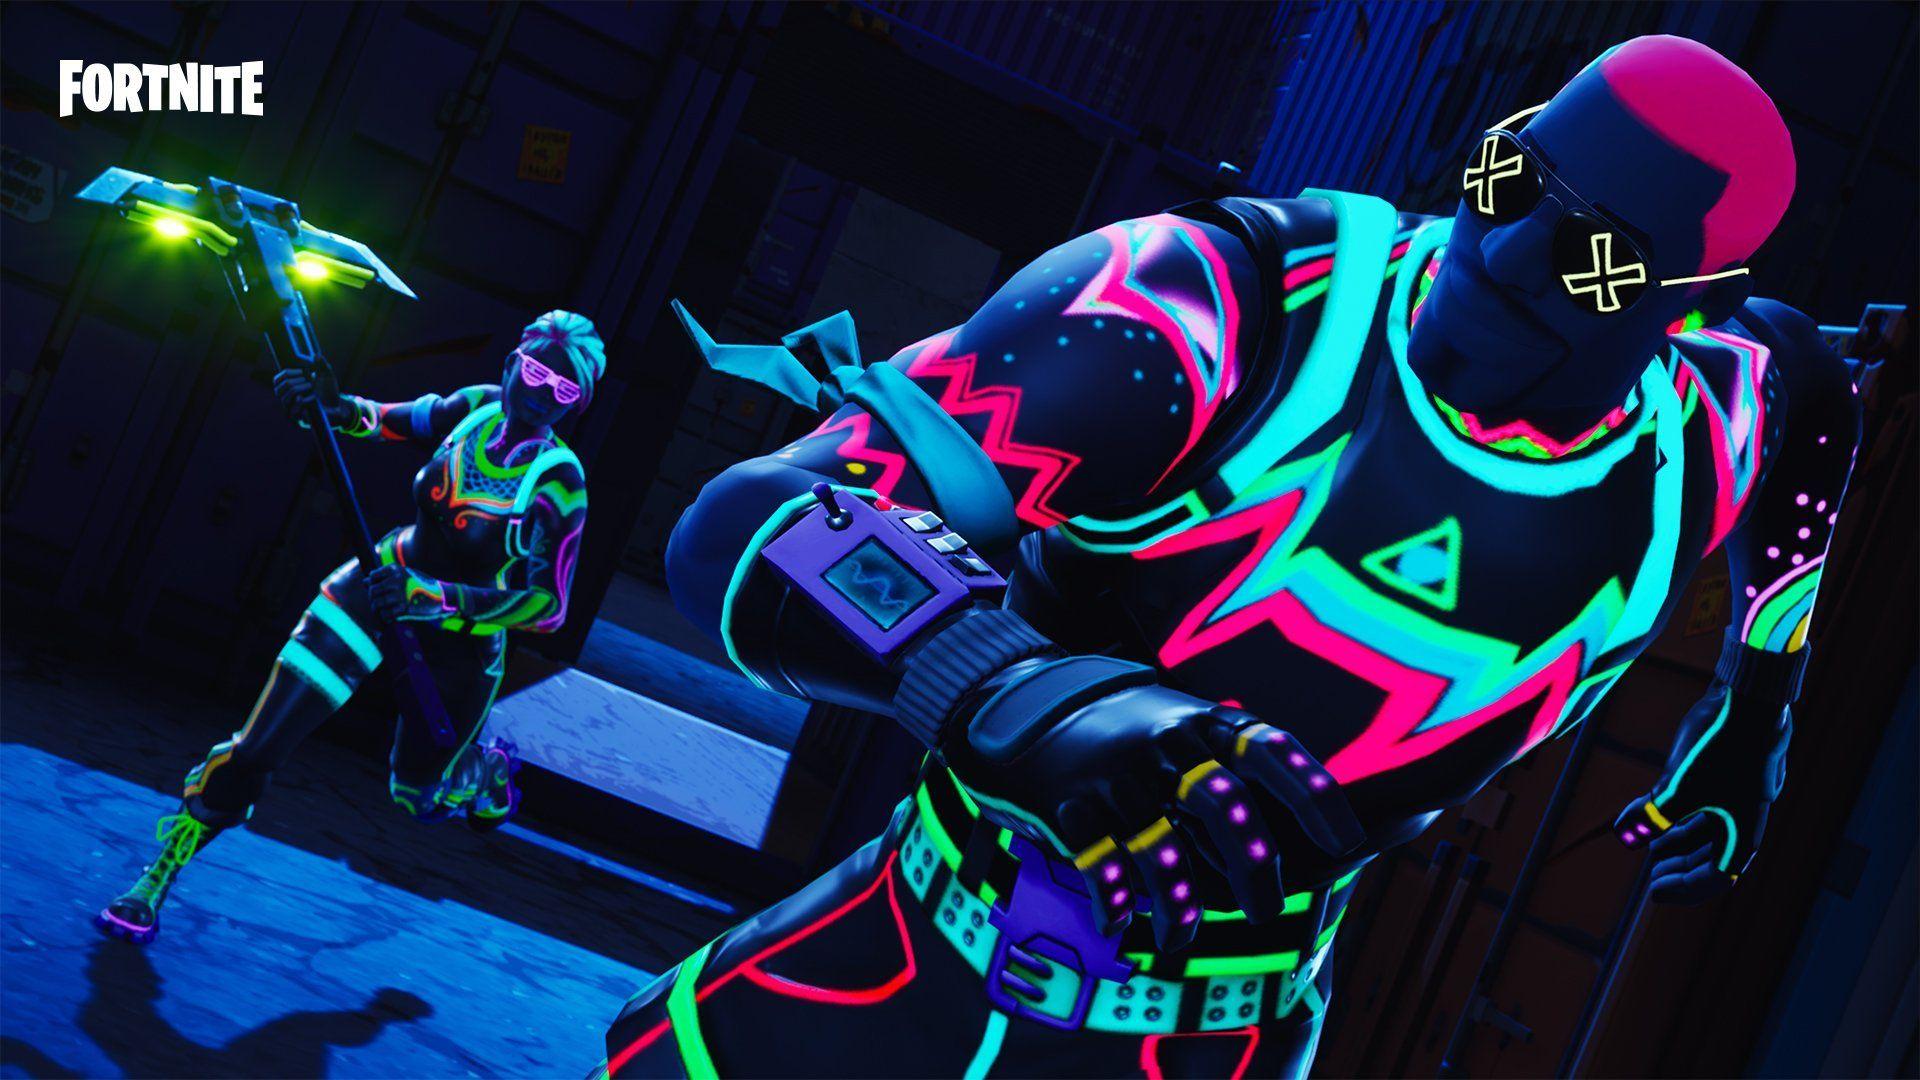 Fortnite new skin Liteshow Outfit HD Wallpaper. Background Image